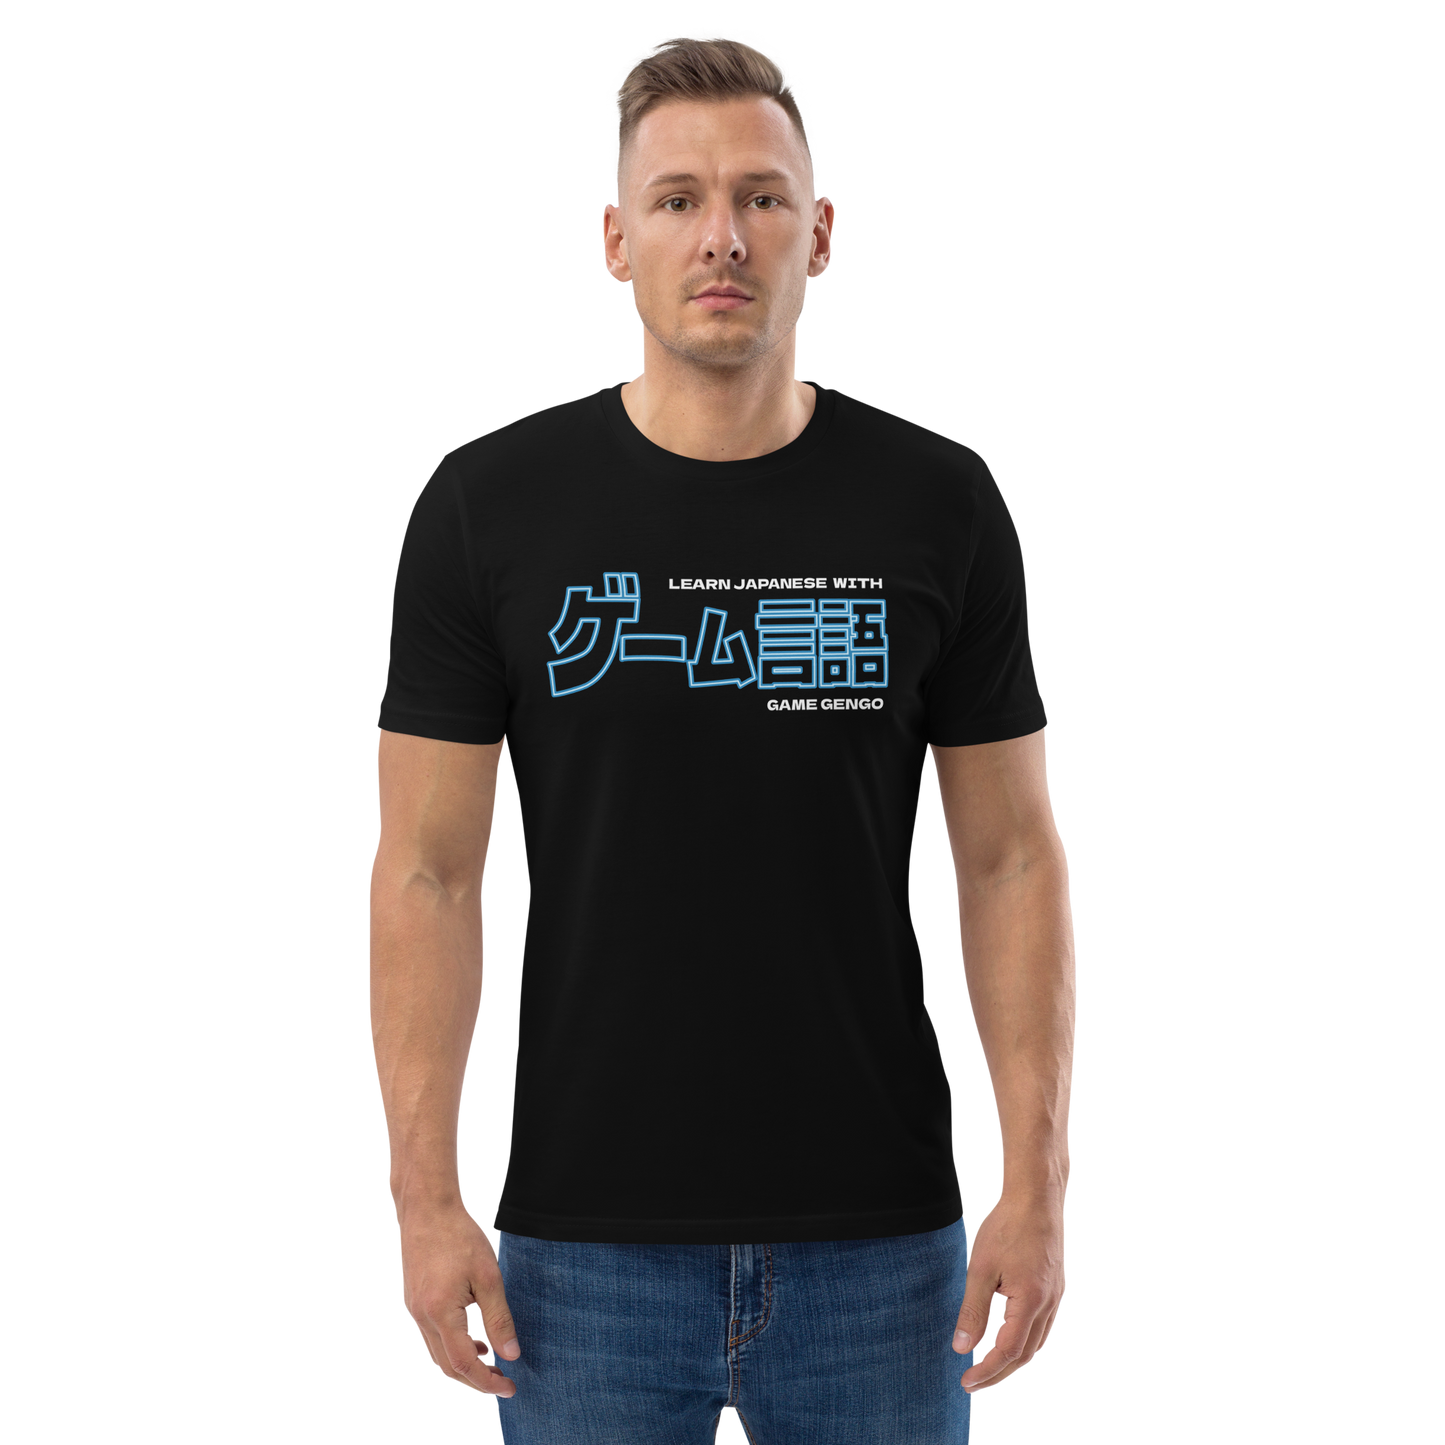 Official Game Gengo T-Shirt (Neon Edition)